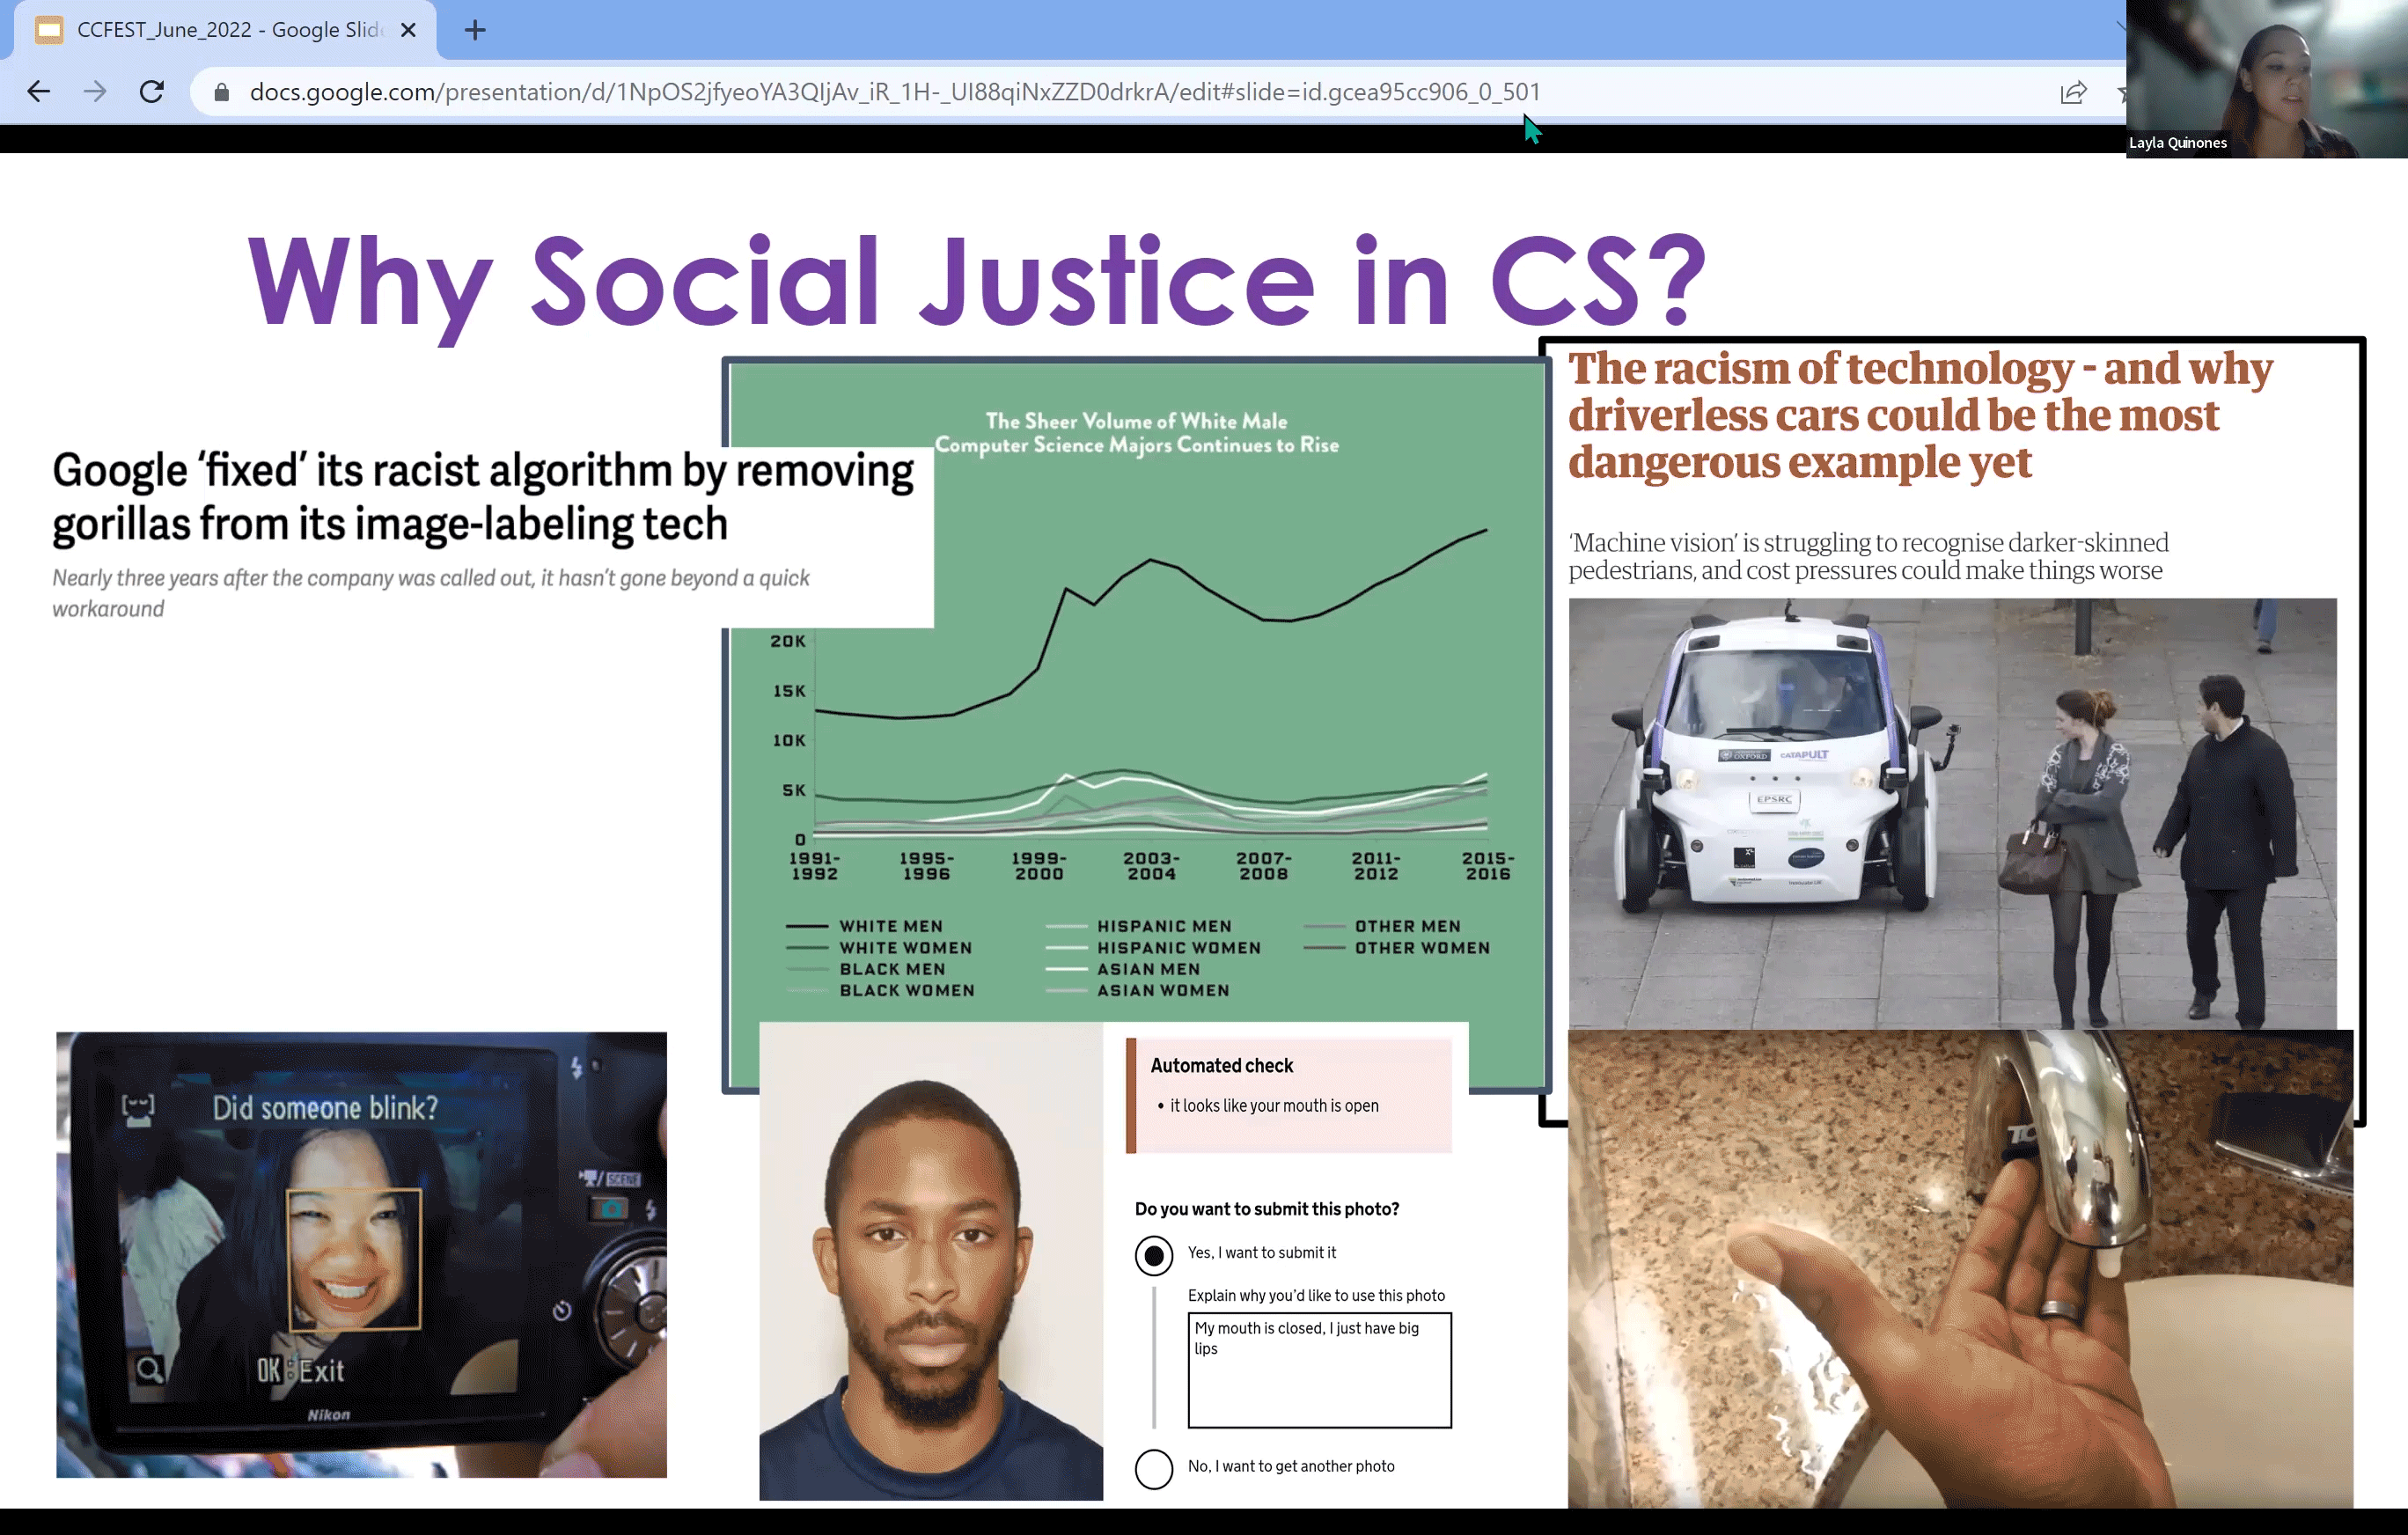 Gif of Layla Quinones going over current social justice issues in Computer Science. Image depicts issues such as racism in Google algorithms, facial detection software, autonomous vehicles, and hand washing sensors.